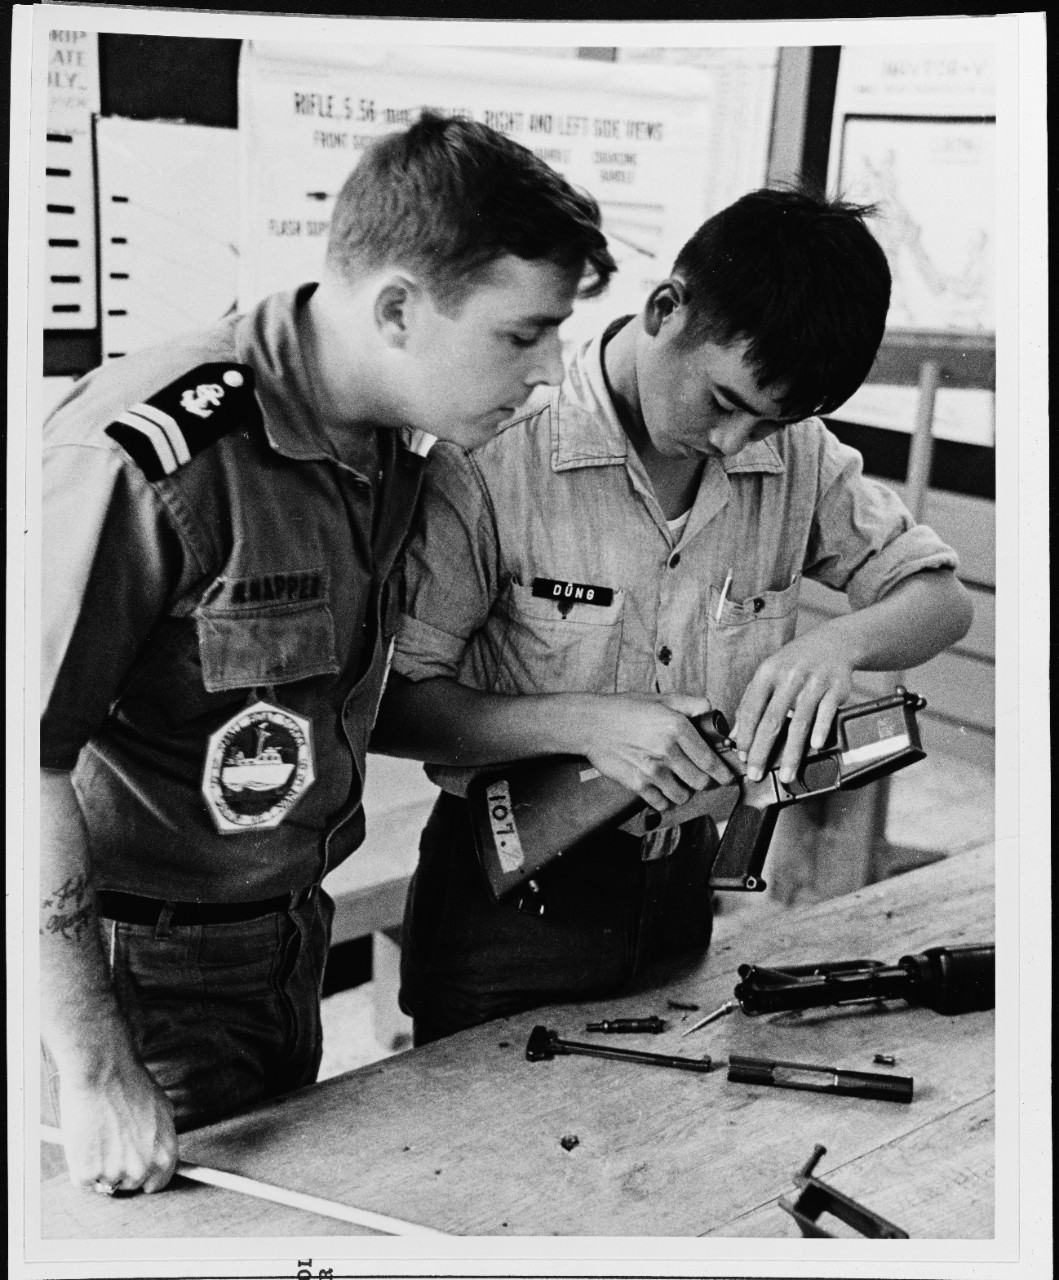 An instructor watches closely as a Vietnamese Student assembles a M-16 rifle